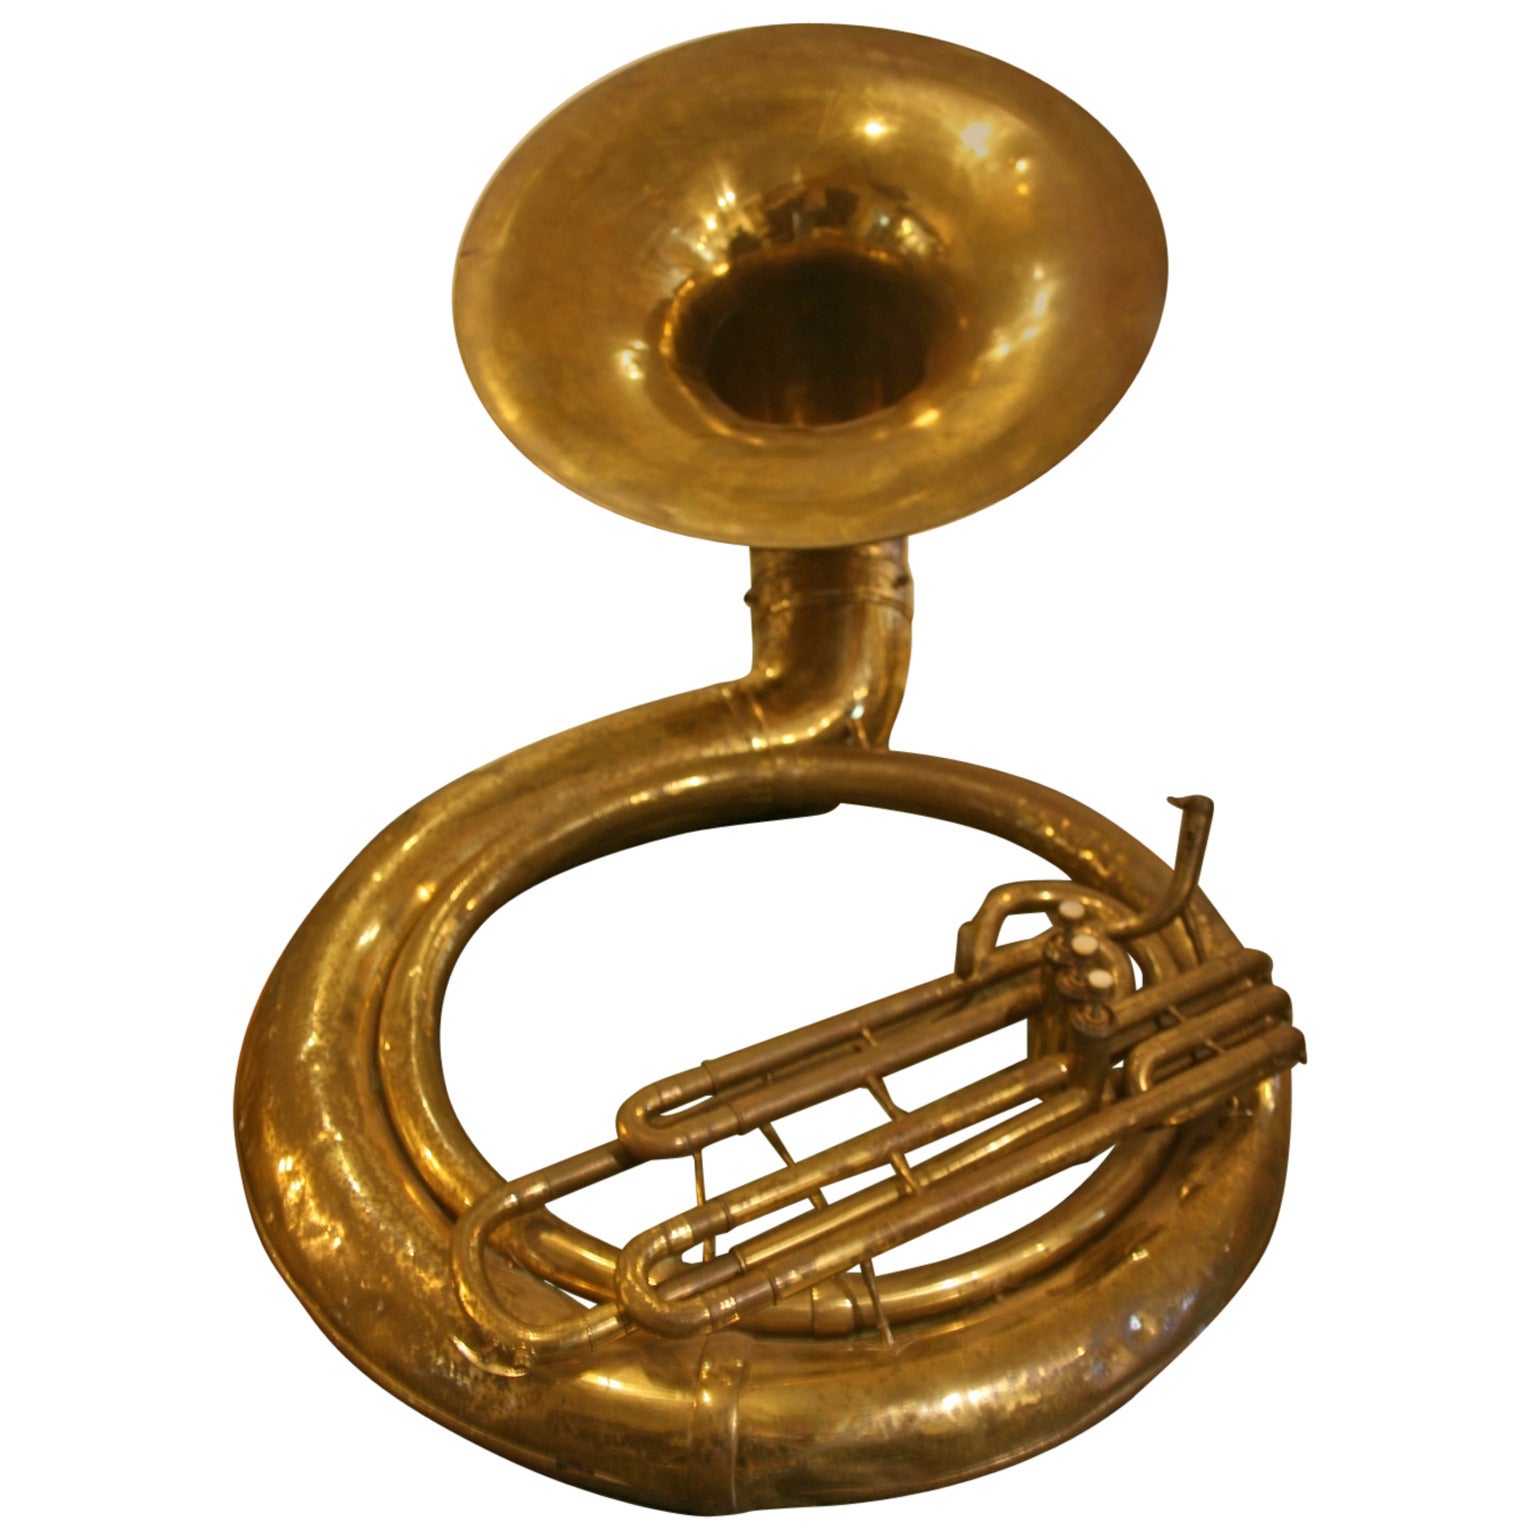 Giant 19th Century Sousaphone For Sale